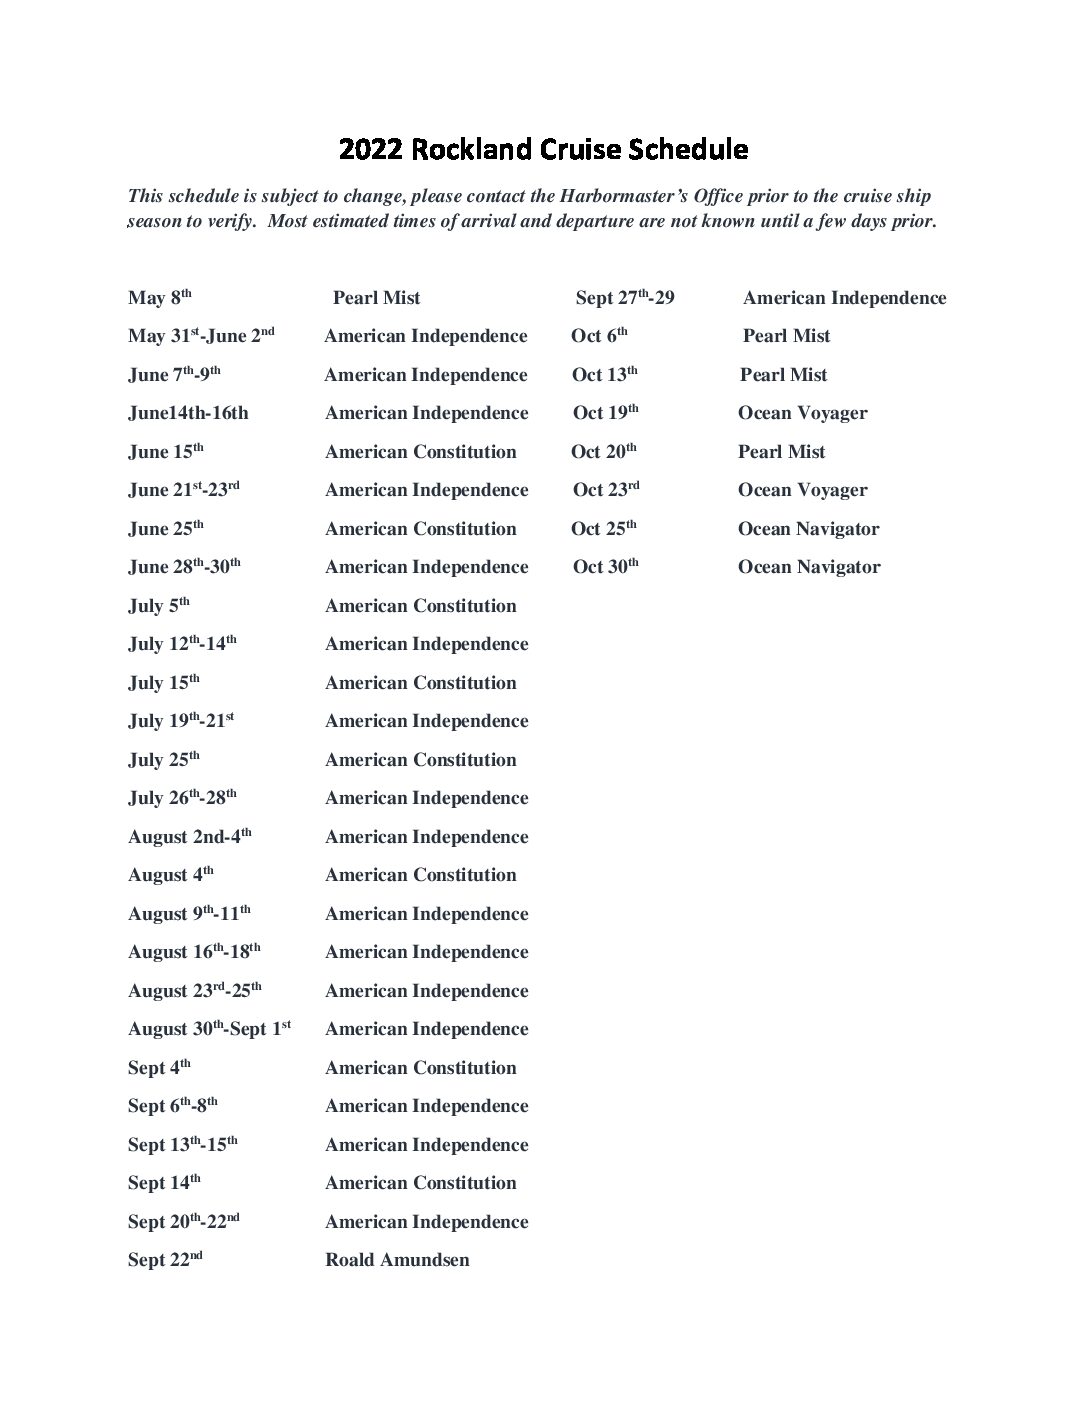 Cruise Ship Schedule for 2022 (tentative) The City of Rockland, Maine